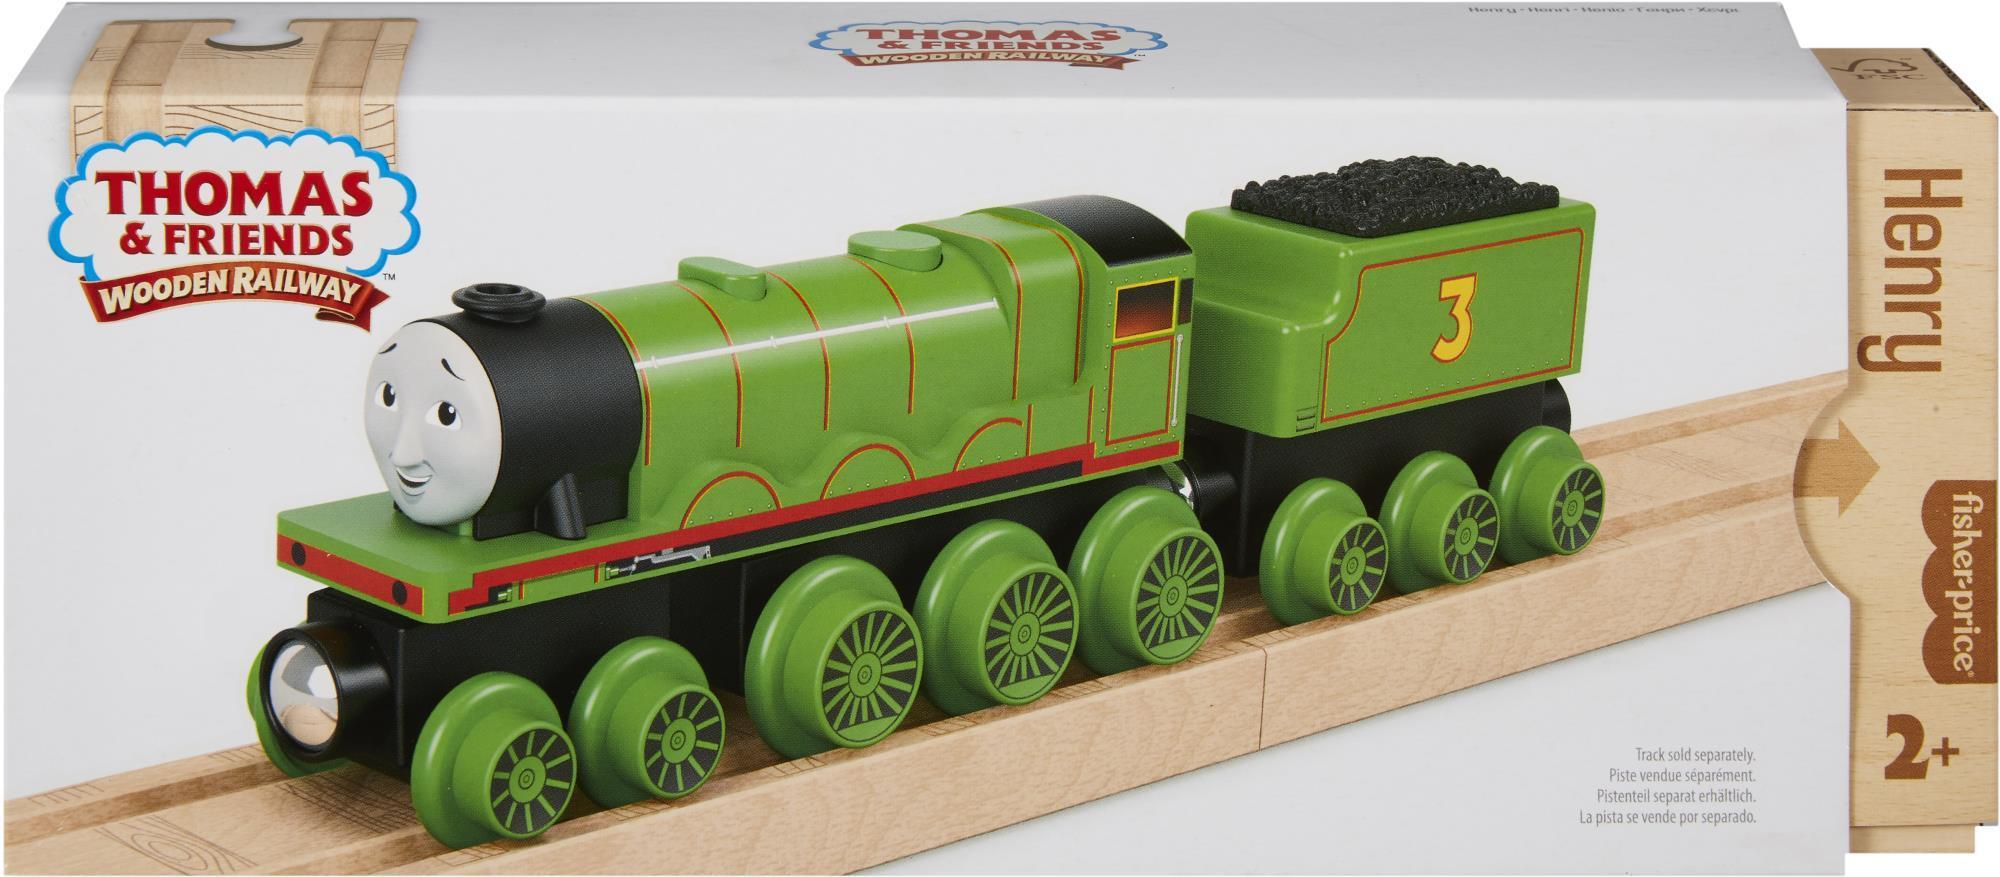 Thomas Wooden Railway Henry Engine And Coal-Car